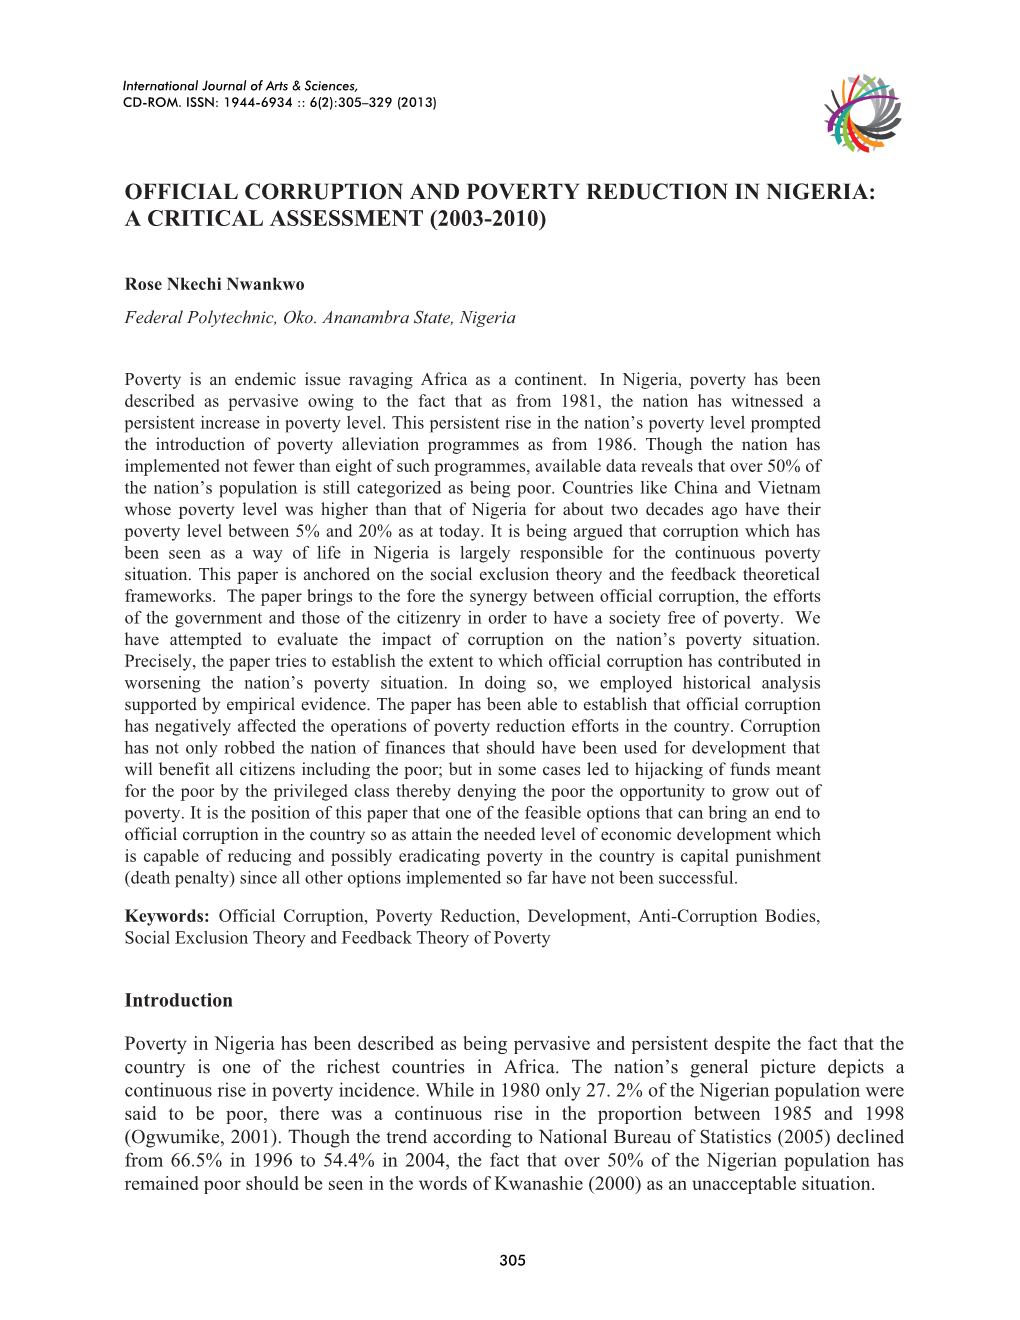 Official Corruption and Poverty Reduction in Nigeria: a Critical Assessment (2003-2010)